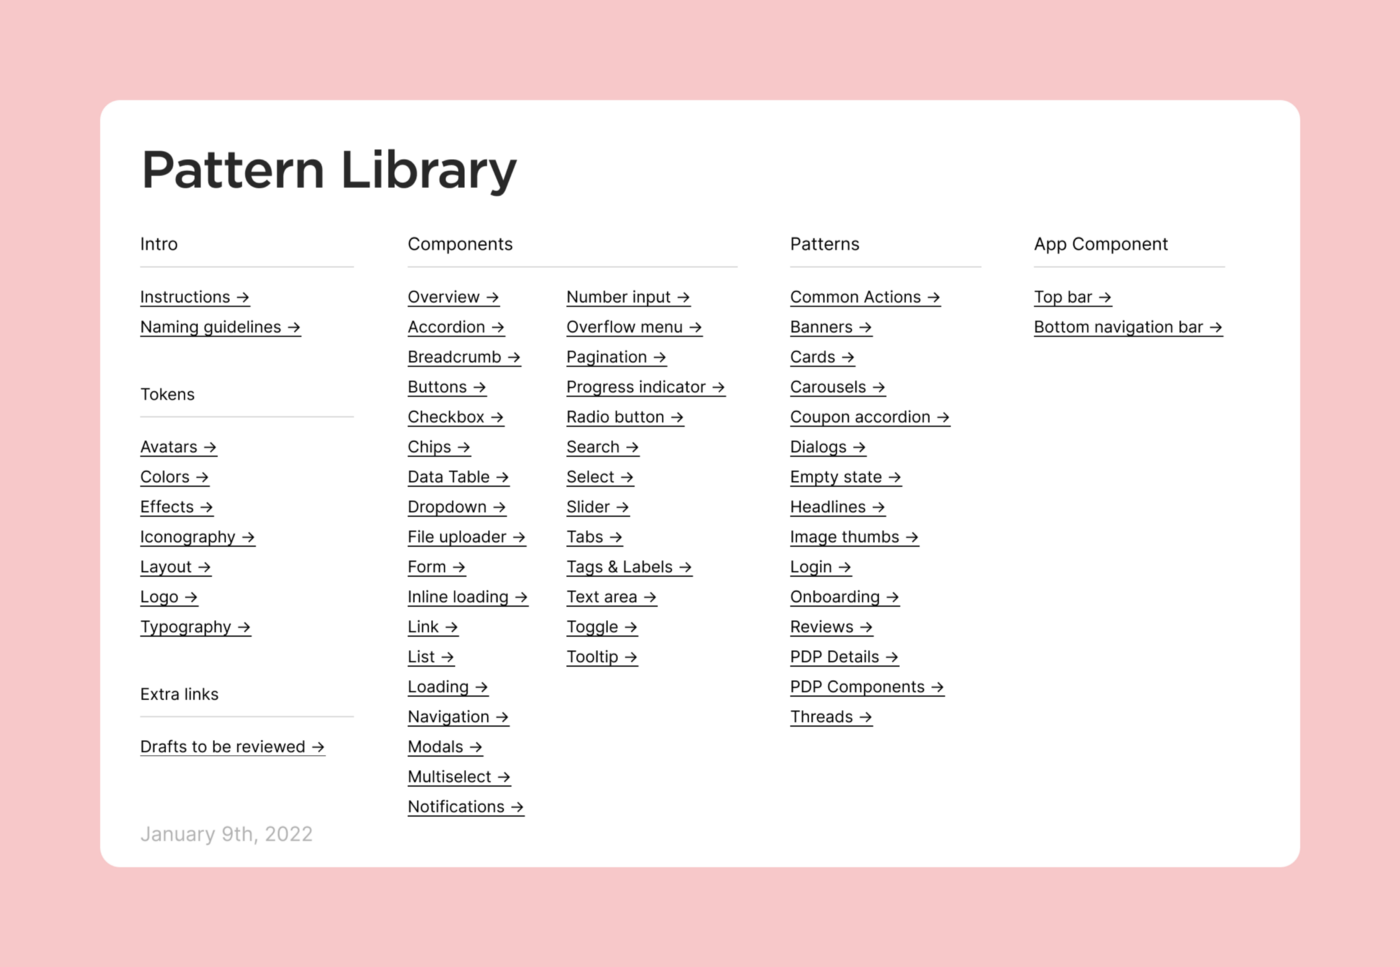 Under the title “Pattern Library,” there are six lists. The “Intro” list has links to “Instructions” and “Naming guidelines.” The “Components” list includes “Overview,” “Accordion,” “Breadcrumb,” “Buttons,” “Checkbox,” “Chips,” “Data table,” and “Dropdown.” Under the list “Patterns,” the choices include “Common Actions,” “Banners,” “Cards,” “Carousels,” “Coupon accordion,” “Dialogs,” “Empty state,” and “Headlines.” The “App Component” list contains “Top bar” and “Bottom navigation bar.” Under “Tokens,” the list reads, “Avatars,” “Colors,” “Effects,” “Iconography,” “Layout,” “Logo,” and “Typography.” “Extra links,” the final list, has a link to “Drafts to be reviewed.”